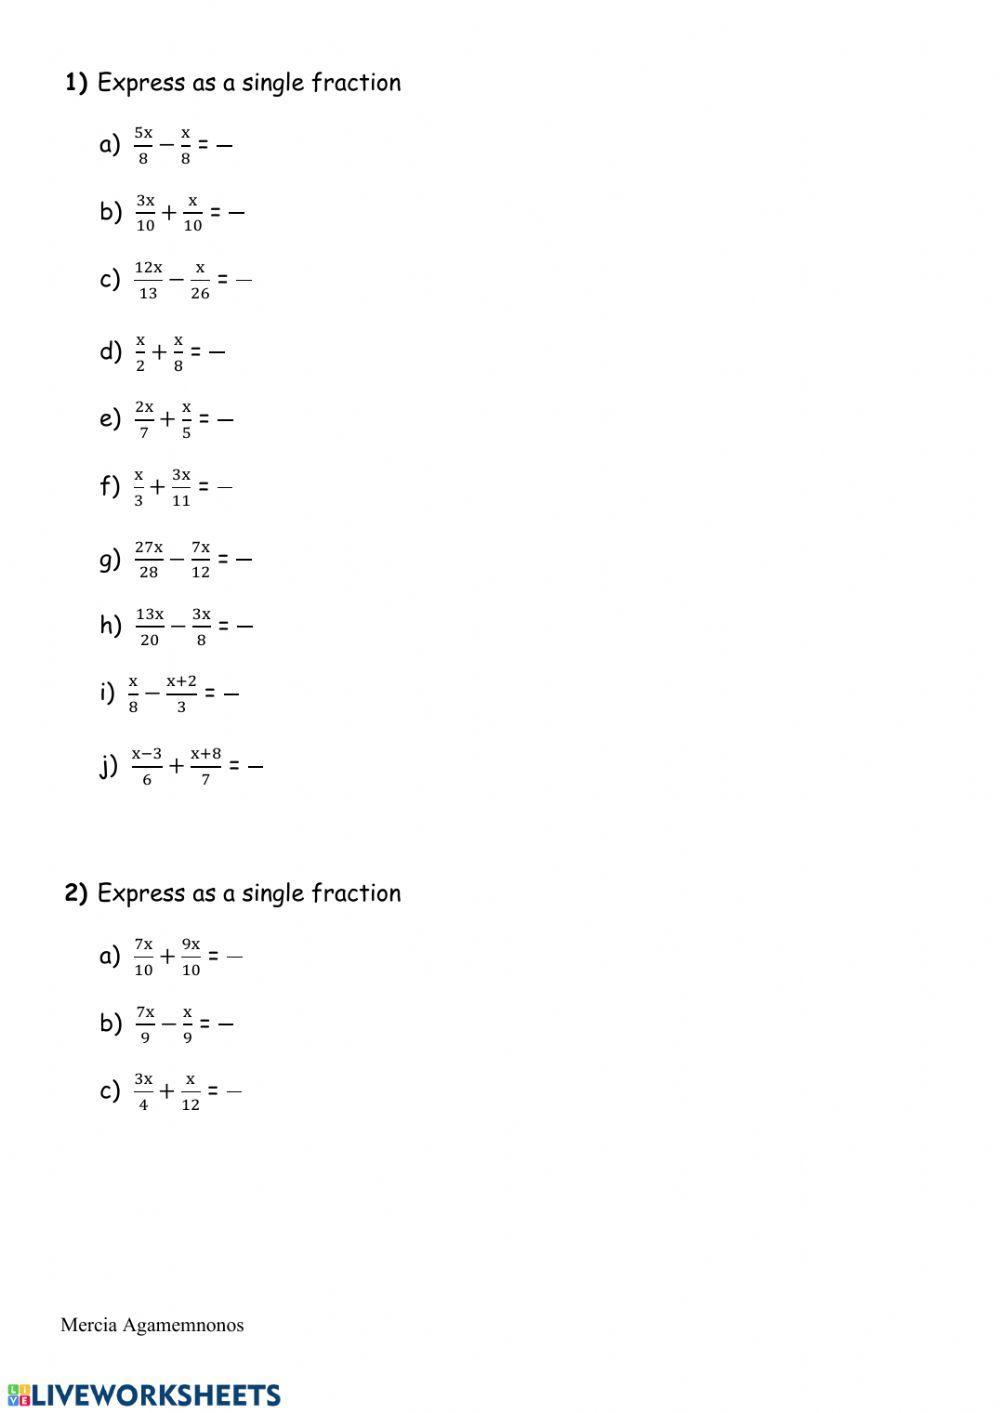 Working with algebraic fractions